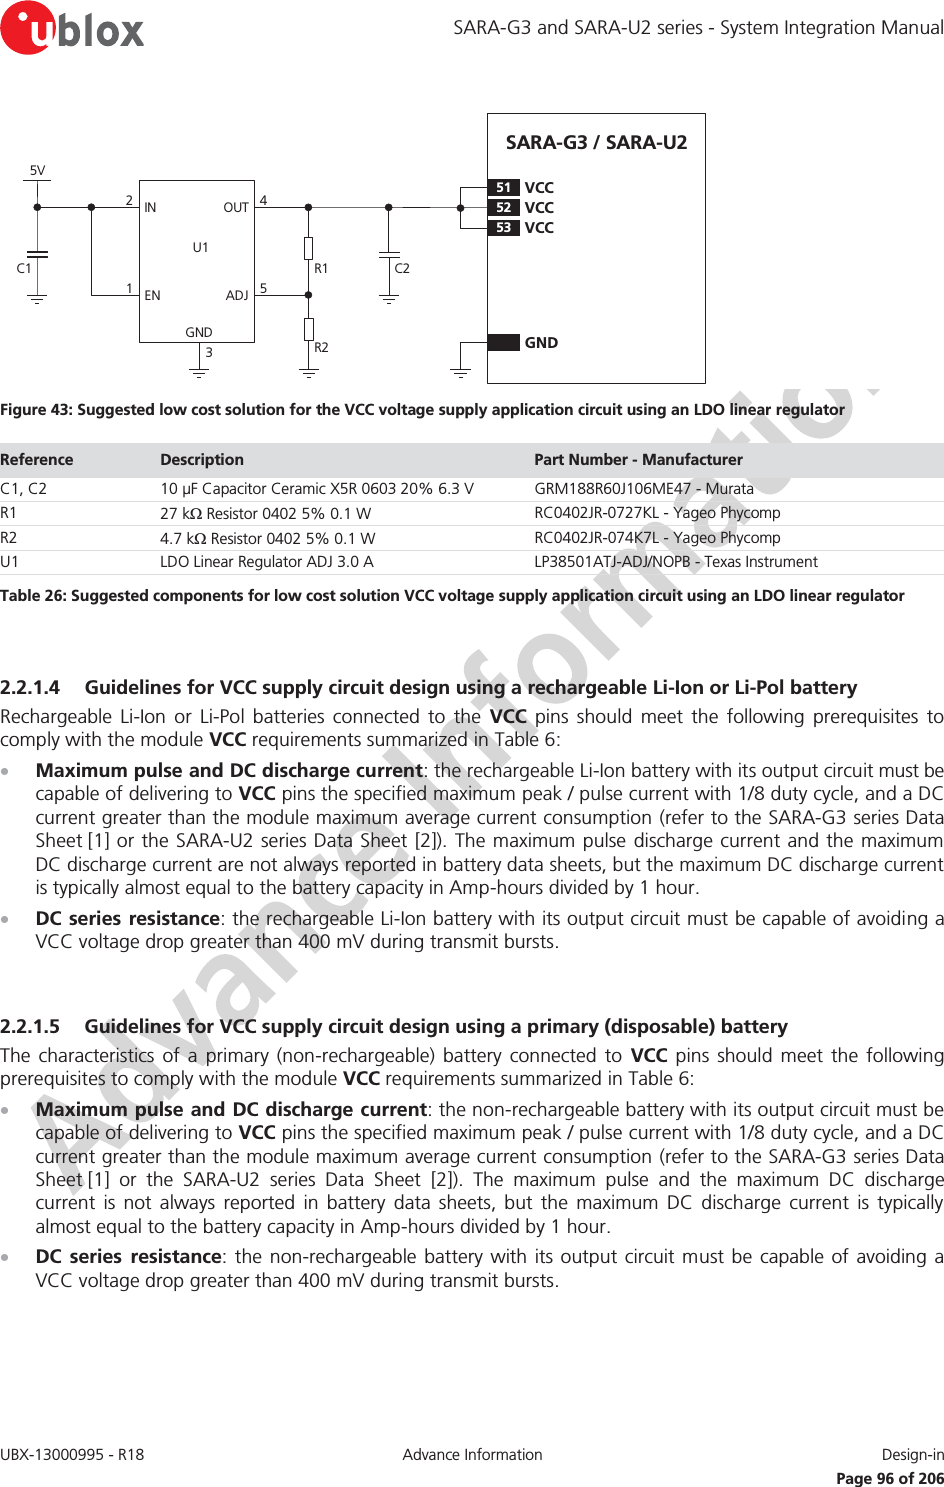 SARA-G3 and SARA-U2 series - System Integration Manual UBX-13000995 - R18  Advance Information  Design-in   Page 96 of 206 5VC1IN OUTADJGND12453C2R1R2U1ENSARA-G3 / SARA-U252 VCC53VCC51VCCGND Figure 43: Suggested low cost solution for the VCC voltage supply application circuit using an LDO linear regulator Reference  Description  Part Number - Manufacturer C1, C2 10 μF Capacitor Ceramic X5R 0603 20% 6.3 V GRM188R60J106ME47 - Murata R1 27 k: Resistor 0402 5% 0.1 W RC0402JR-0727KL - Yageo Phycomp R2 4.7 k: Resistor 0402 5% 0.1 W RC0402JR-074K7L - Yageo Phycomp U1 LDO Linear Regulator ADJ 3.0 A LP38501ATJ-ADJ/NOPB - Texas Instrument Table 26: Suggested components for low cost solution VCC voltage supply application circuit using an LDO linear regulator  2.2.1.4 Guidelines for VCC supply circuit design using a rechargeable Li-Ion or Li-Pol battery Rechargeable Li-Ion or Li-Pol batteries connected to the VCC pins should meet the following prerequisites to comply with the module VCC requirements summarized in Table 6: x Maximum pulse and DC discharge current: the rechargeable Li-Ion battery with its output circuit must be capable of delivering to VCC pins the specified maximum peak / pulse current with 1/8 duty cycle, and a DC current greater than the module maximum average current consumption (refer to the SARA-G3 series Data Sheet [1] or the SARA-U2 series Data Sheet [2]). The maximum pulse discharge current and the maximum DC discharge current are not always reported in battery data sheets, but the maximum DC discharge current is typically almost equal to the battery capacity in Amp-hours divided by 1 hour. x DC series resistance: the rechargeable Li-Ion battery with its output circuit must be capable of avoiding a VCC voltage drop greater than 400 mV during transmit bursts.   2.2.1.5 Guidelines for VCC supply circuit design using a primary (disposable) battery The characteristics of a primary (non-rechargeable) battery connected to VCC pins should meet the following prerequisites to comply with the module VCC requirements summarized in Table 6: x Maximum pulse and DC discharge current: the non-rechargeable battery with its output circuit must be capable of delivering to VCC pins the specified maximum peak / pulse current with 1/8 duty cycle, and a DC current greater than the module maximum average current consumption (refer to the SARA-G3 series Data Sheet [1] or the SARA-U2 series Data Sheet [2]). The maximum pulse and the maximum DC discharge current is not always reported in battery data sheets, but the maximum DC discharge current is typically almost equal to the battery capacity in Amp-hours divided by 1 hour. x DC series resistance: the non-rechargeable battery with its output circuit must be capable of avoiding a VCC voltage drop greater than 400 mV during transmit bursts.  